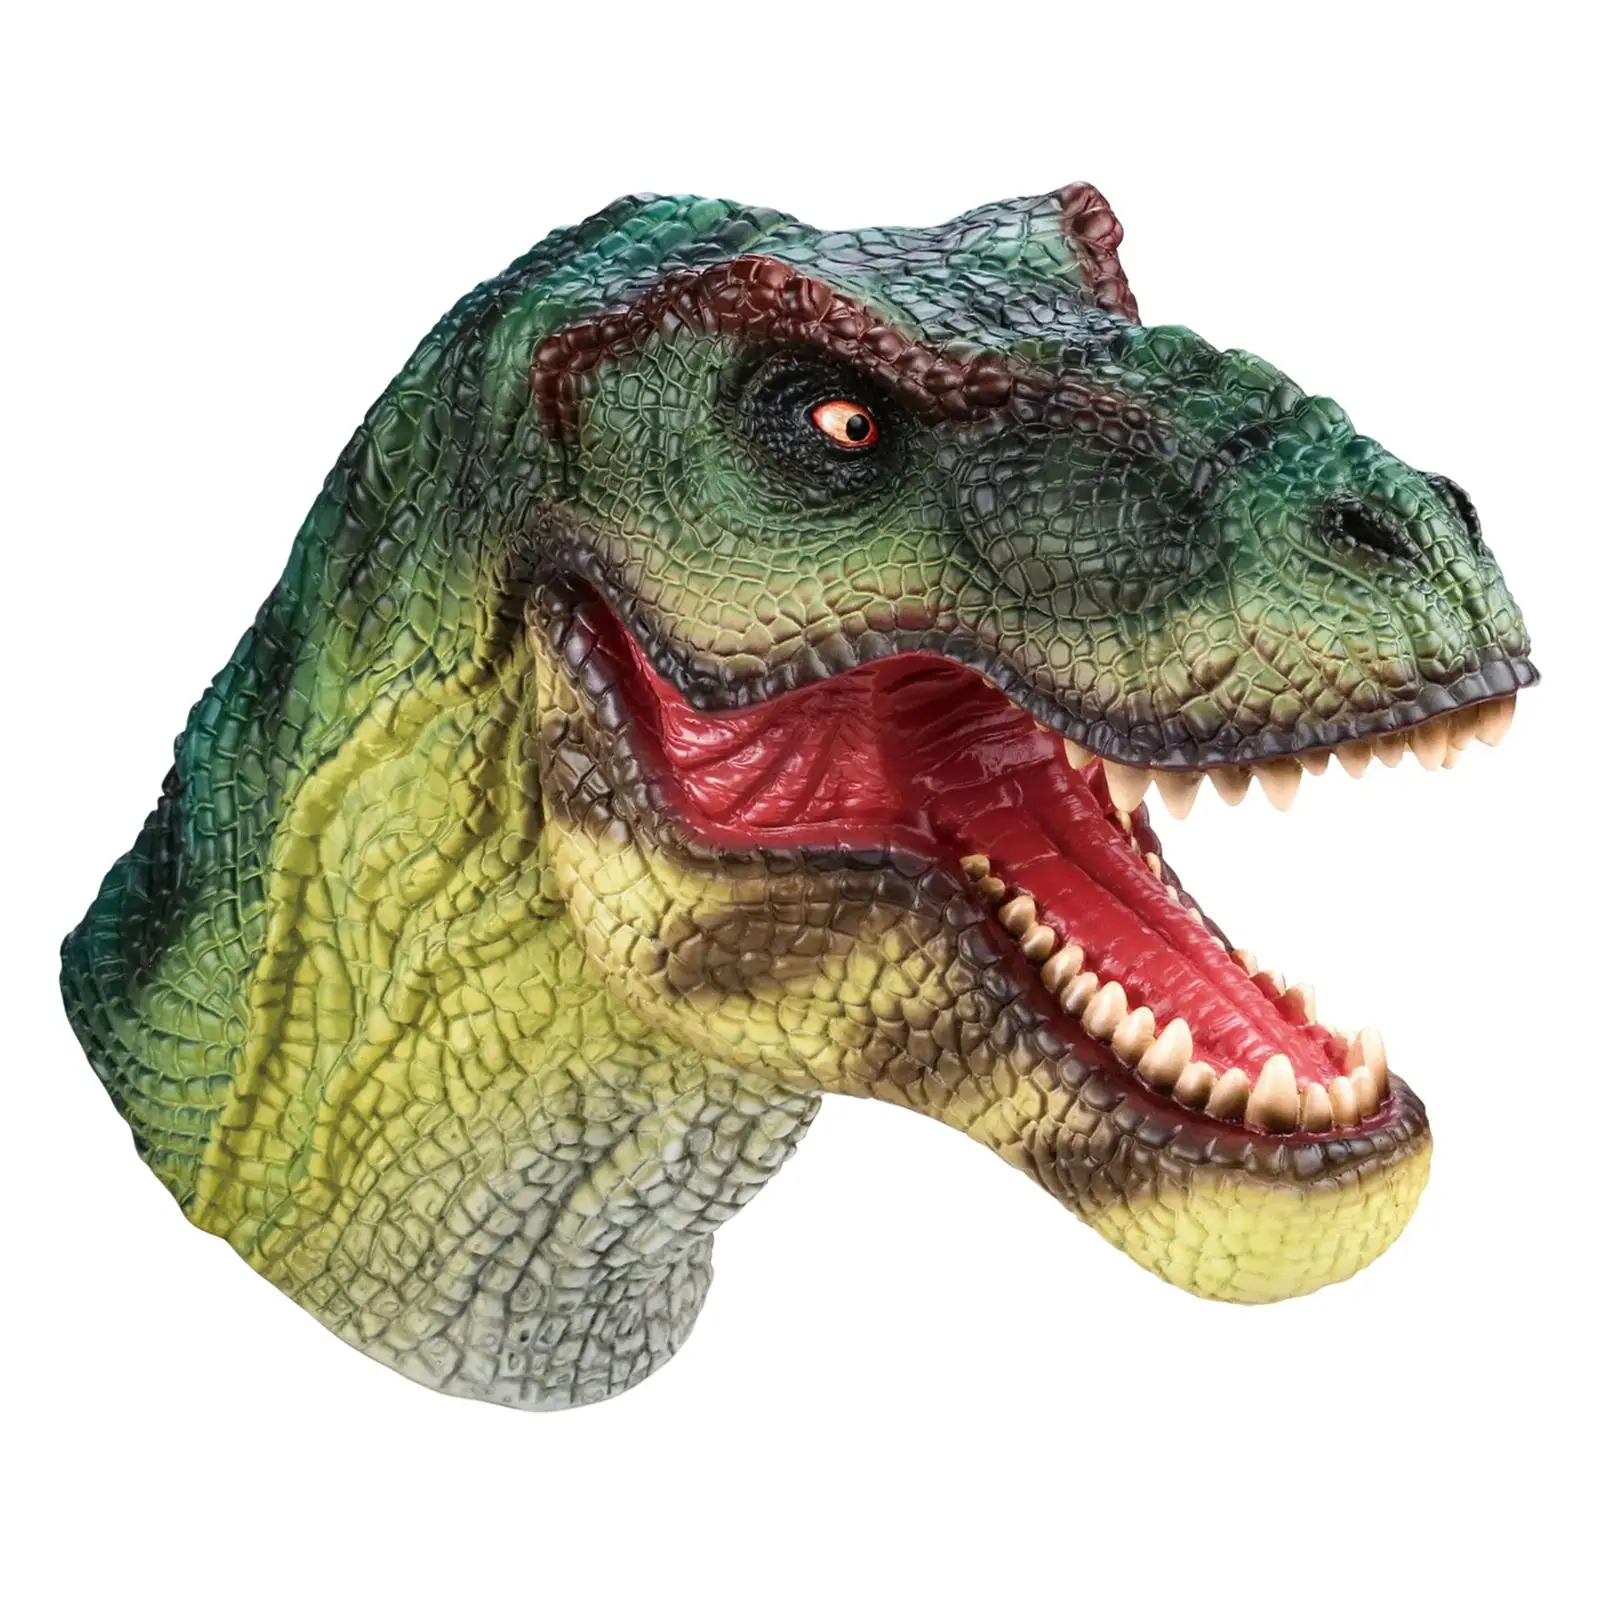 Dinosaur Model Hand Puppet Interactive Toys Halloween Decorations Gloves for Parties Role Play Games Preschool Girls Toddlers